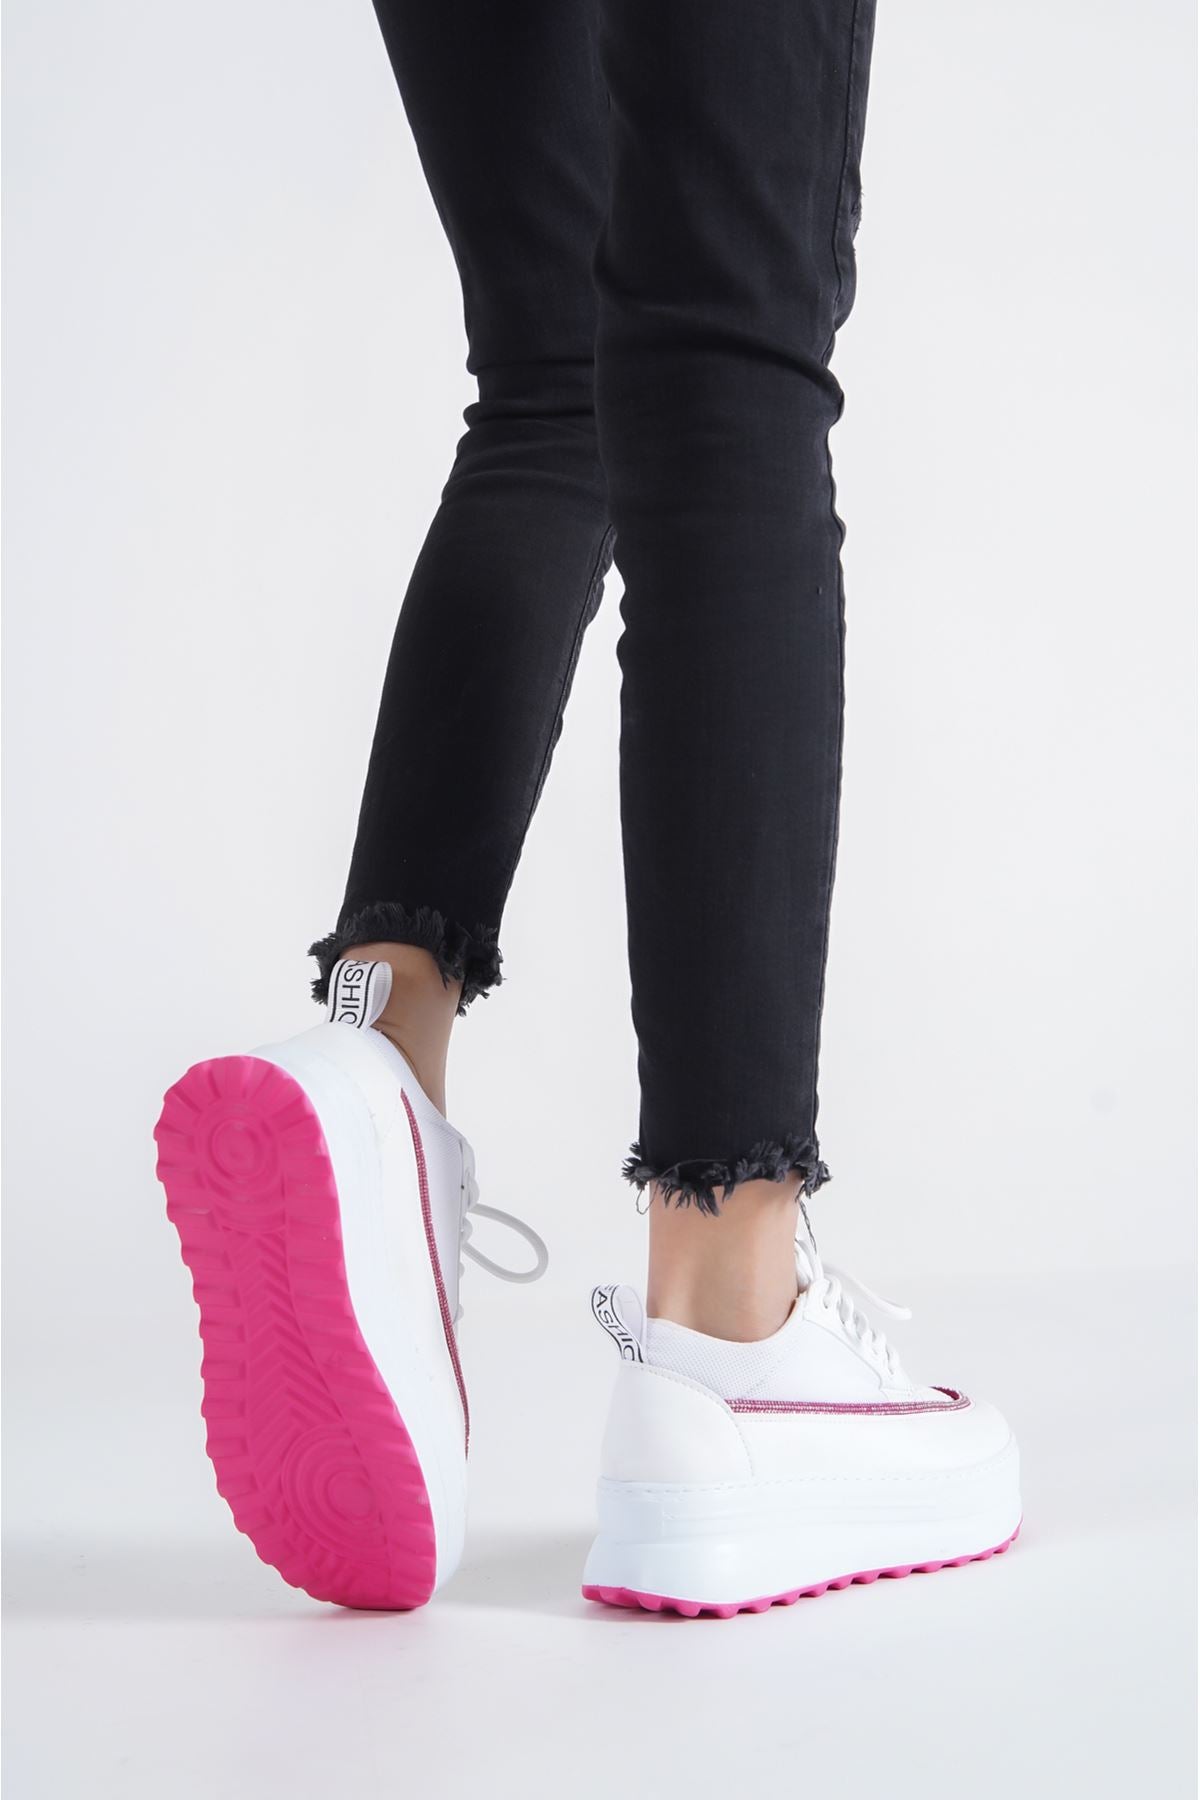 JASMIN pink white Sneakers Shoes - STREET MODE ™